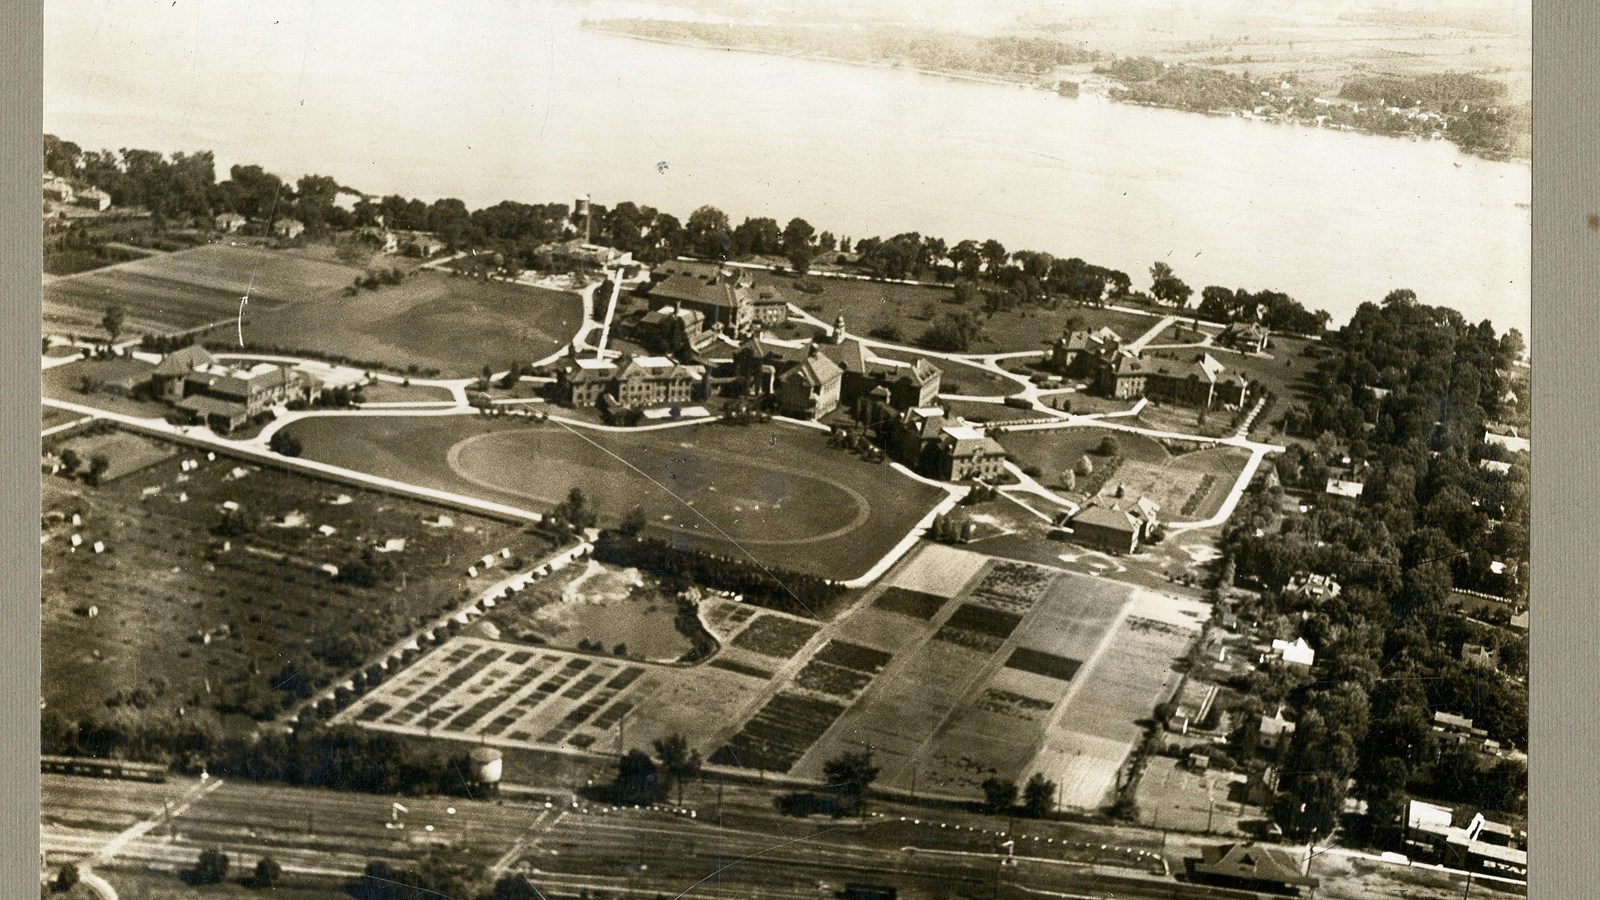 Black and white aerial of campus with lots of buildings and lots of paths, flat green space inside